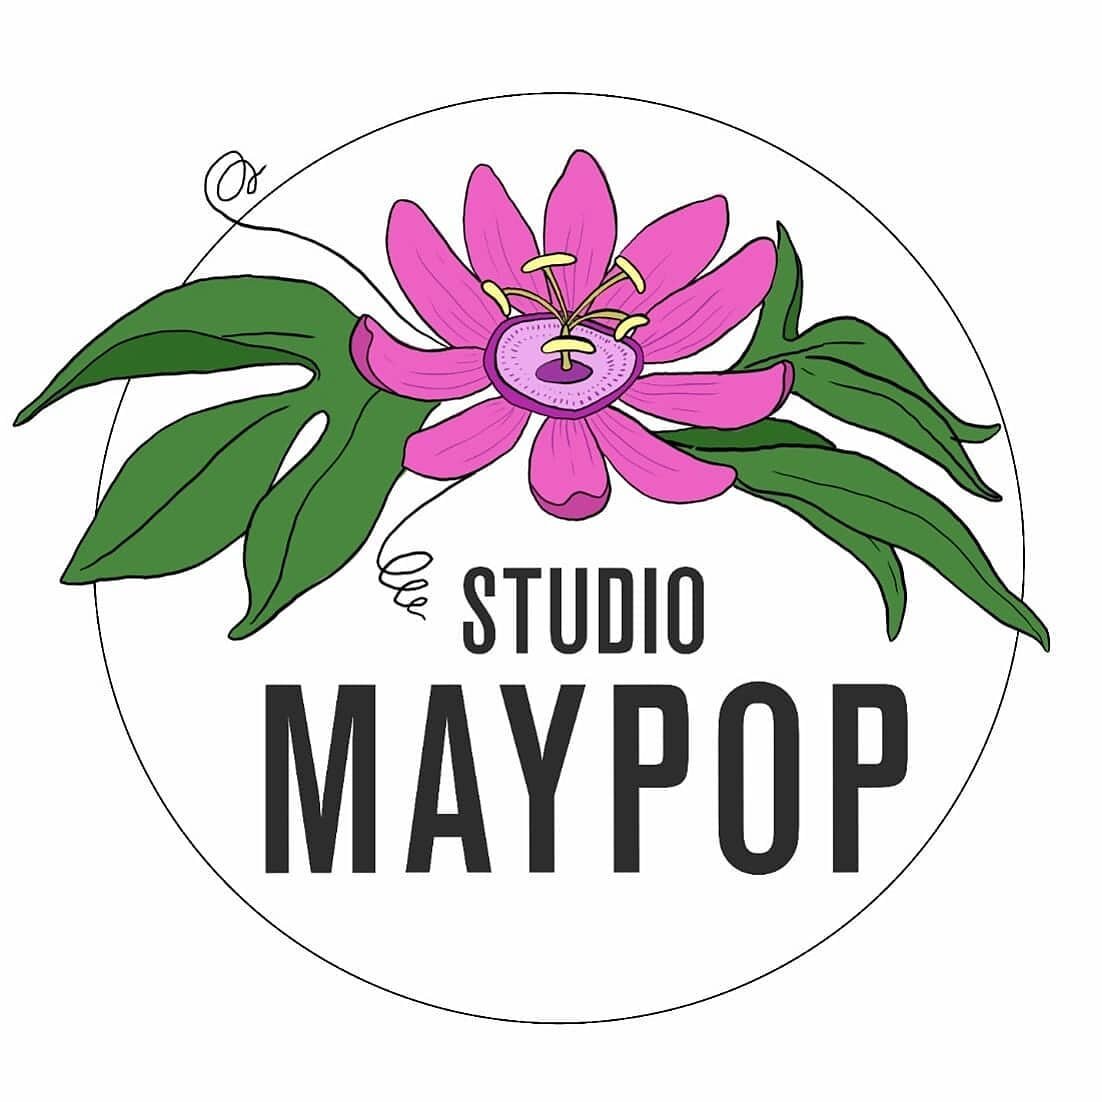 📢Big Announcement📢

I'm opening a new studio and showroom, here in Durham! Coming soon, I'll be making all my work, and sharing it with y'all, at Studio Maypop (@studio_maypop)! 

While it's going to take me a bit to get it fully set up, I'm hostin